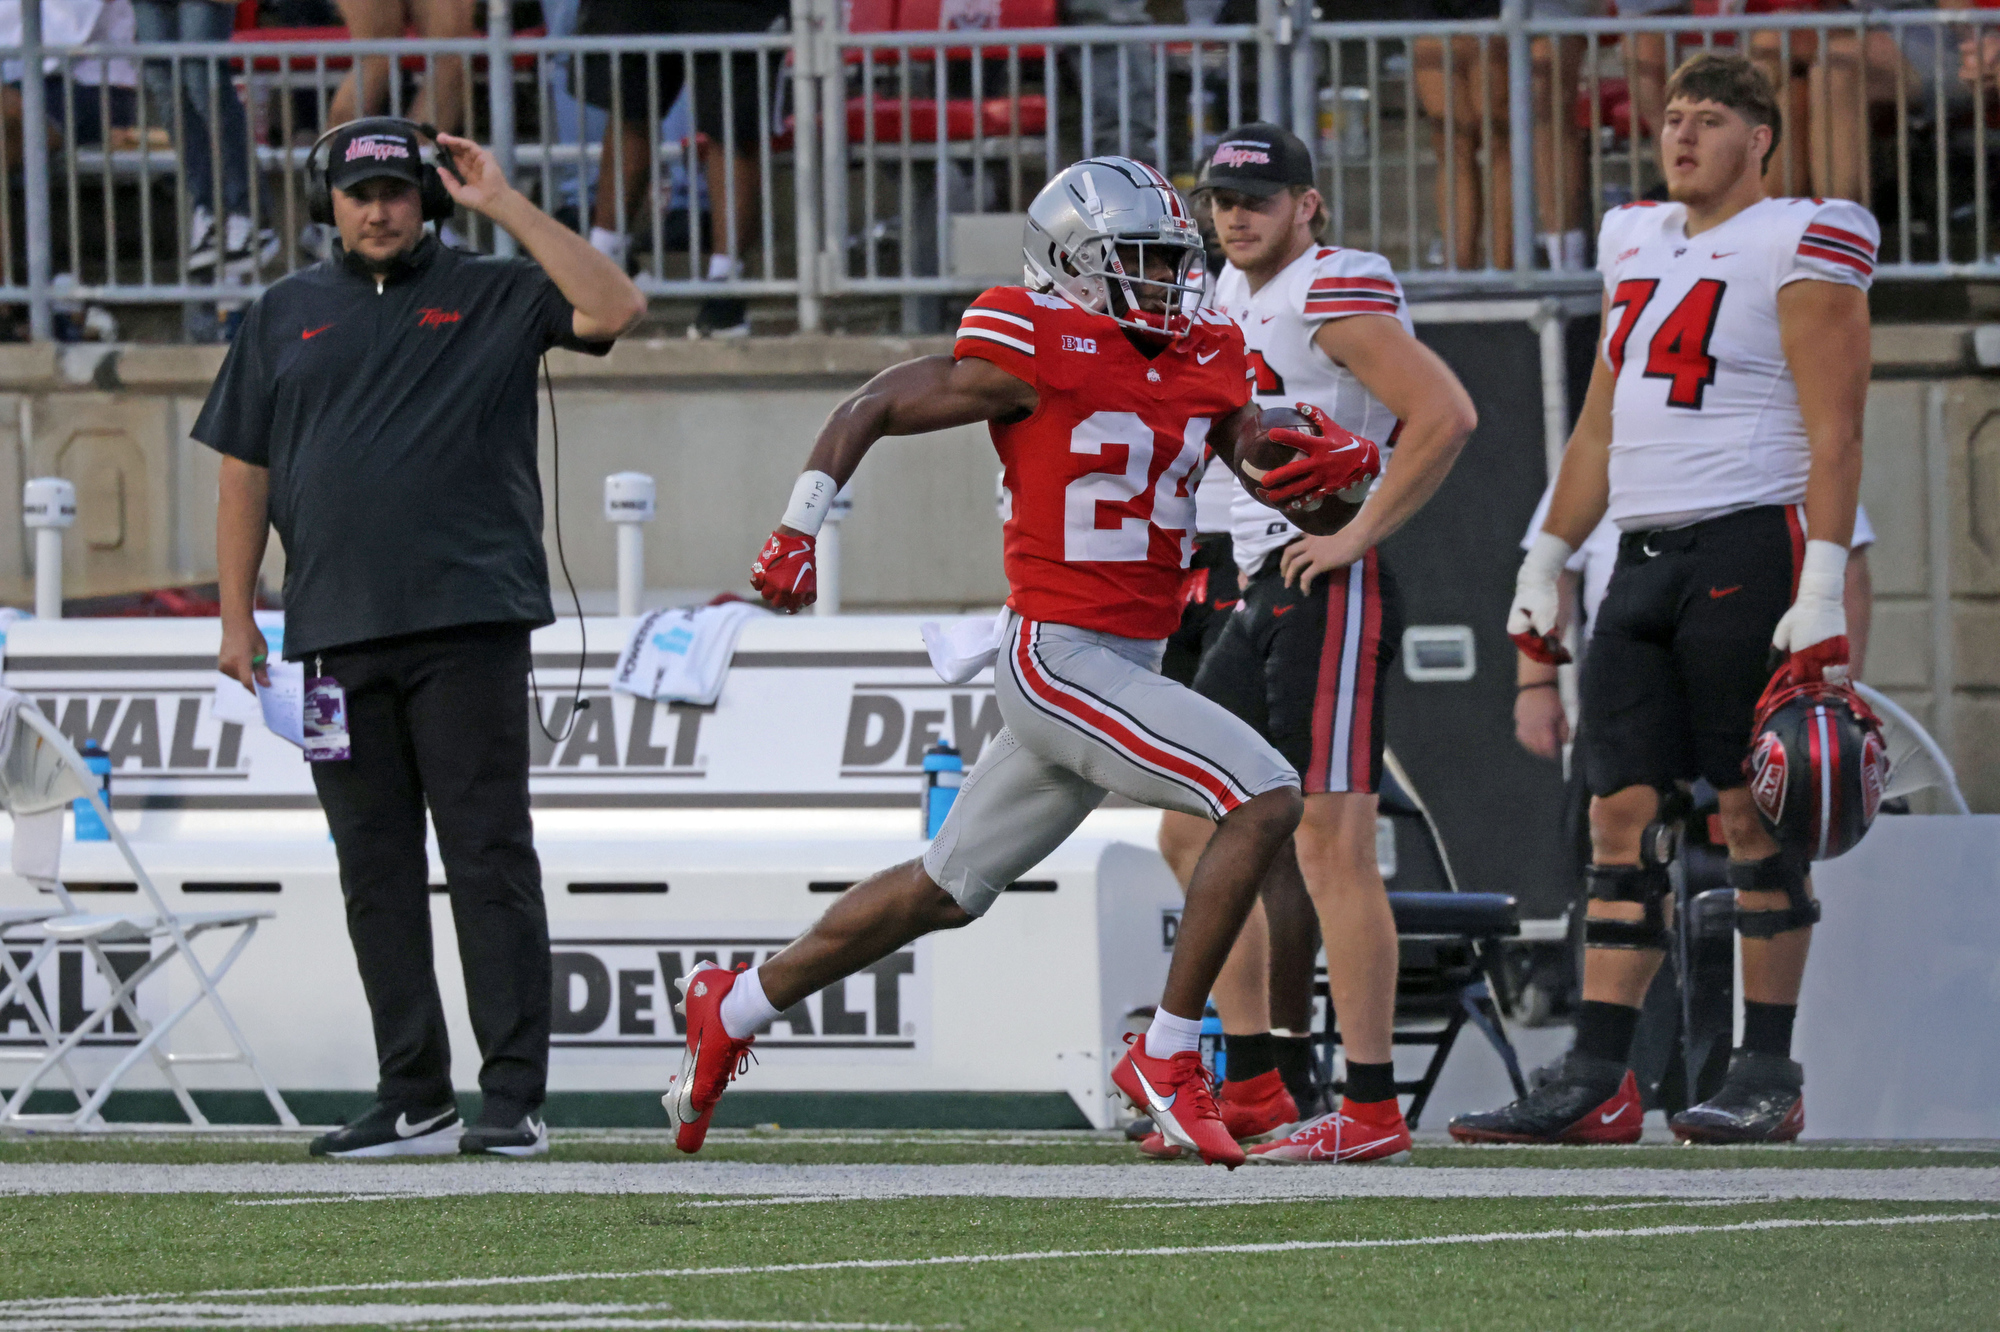 Sparked by Hancock's 93-yard pick 6, No. 3 Ohio State rallies from